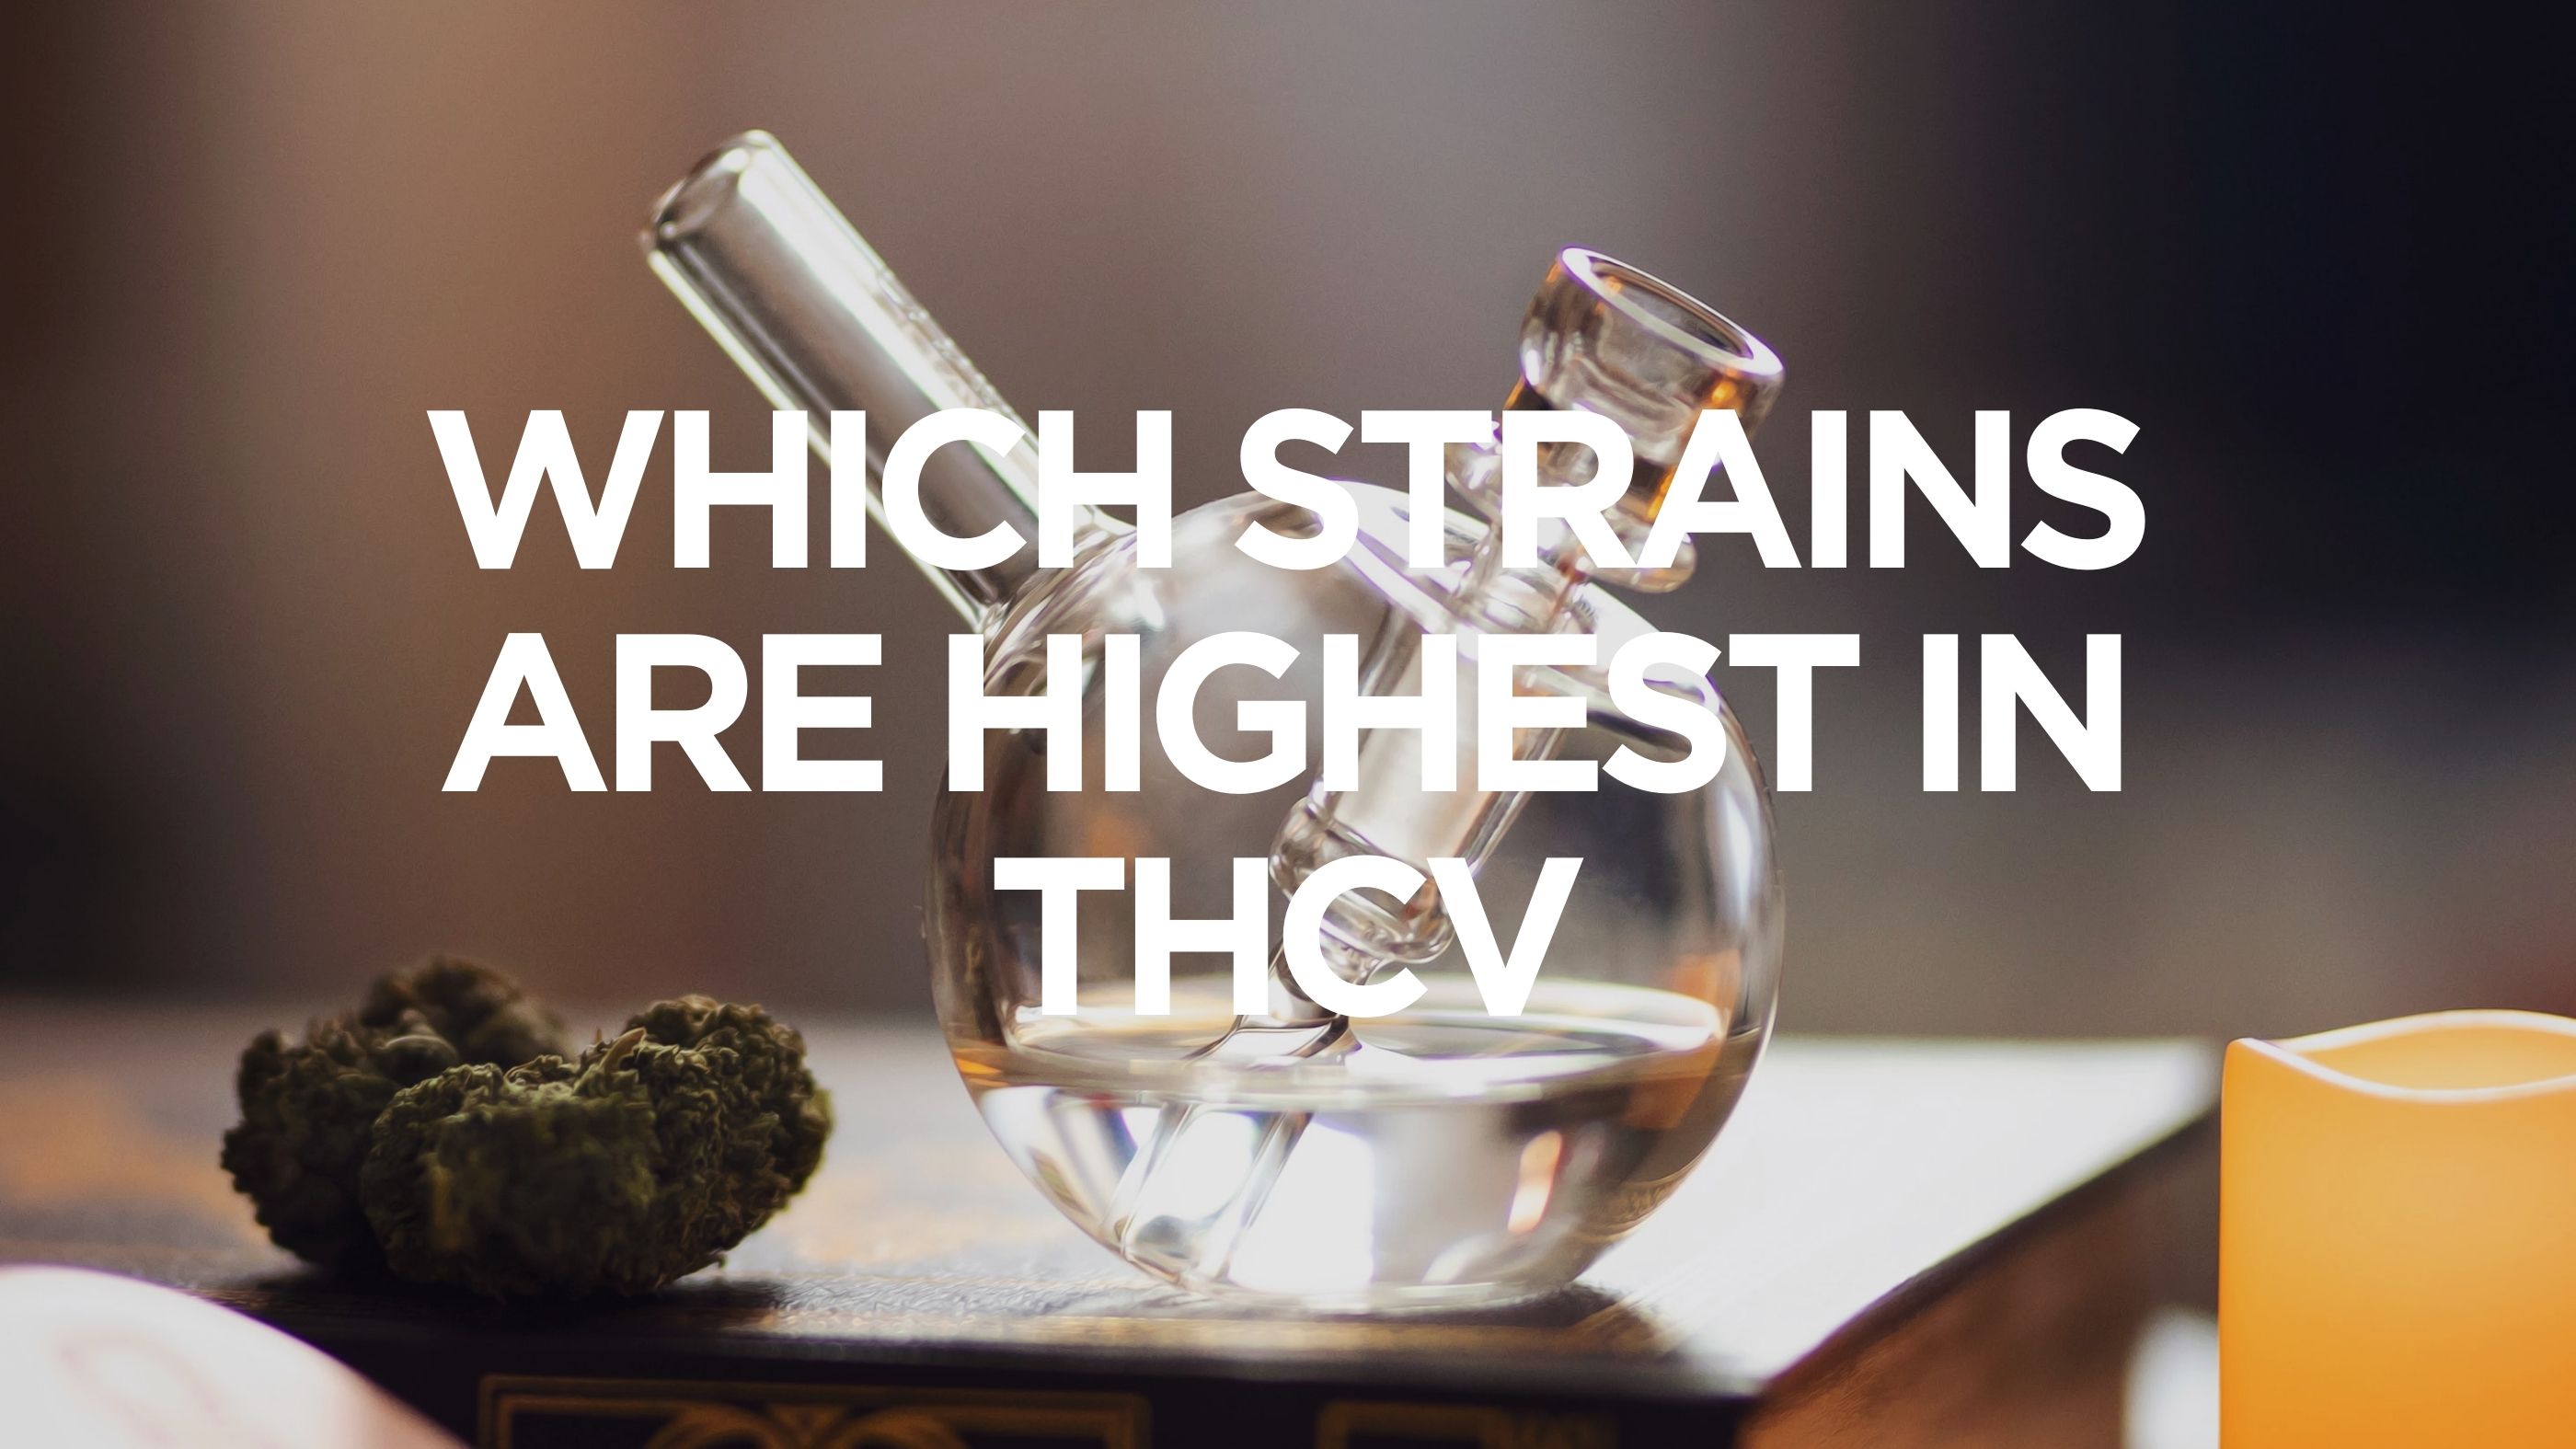 Which Strains Are Highest in THCV?